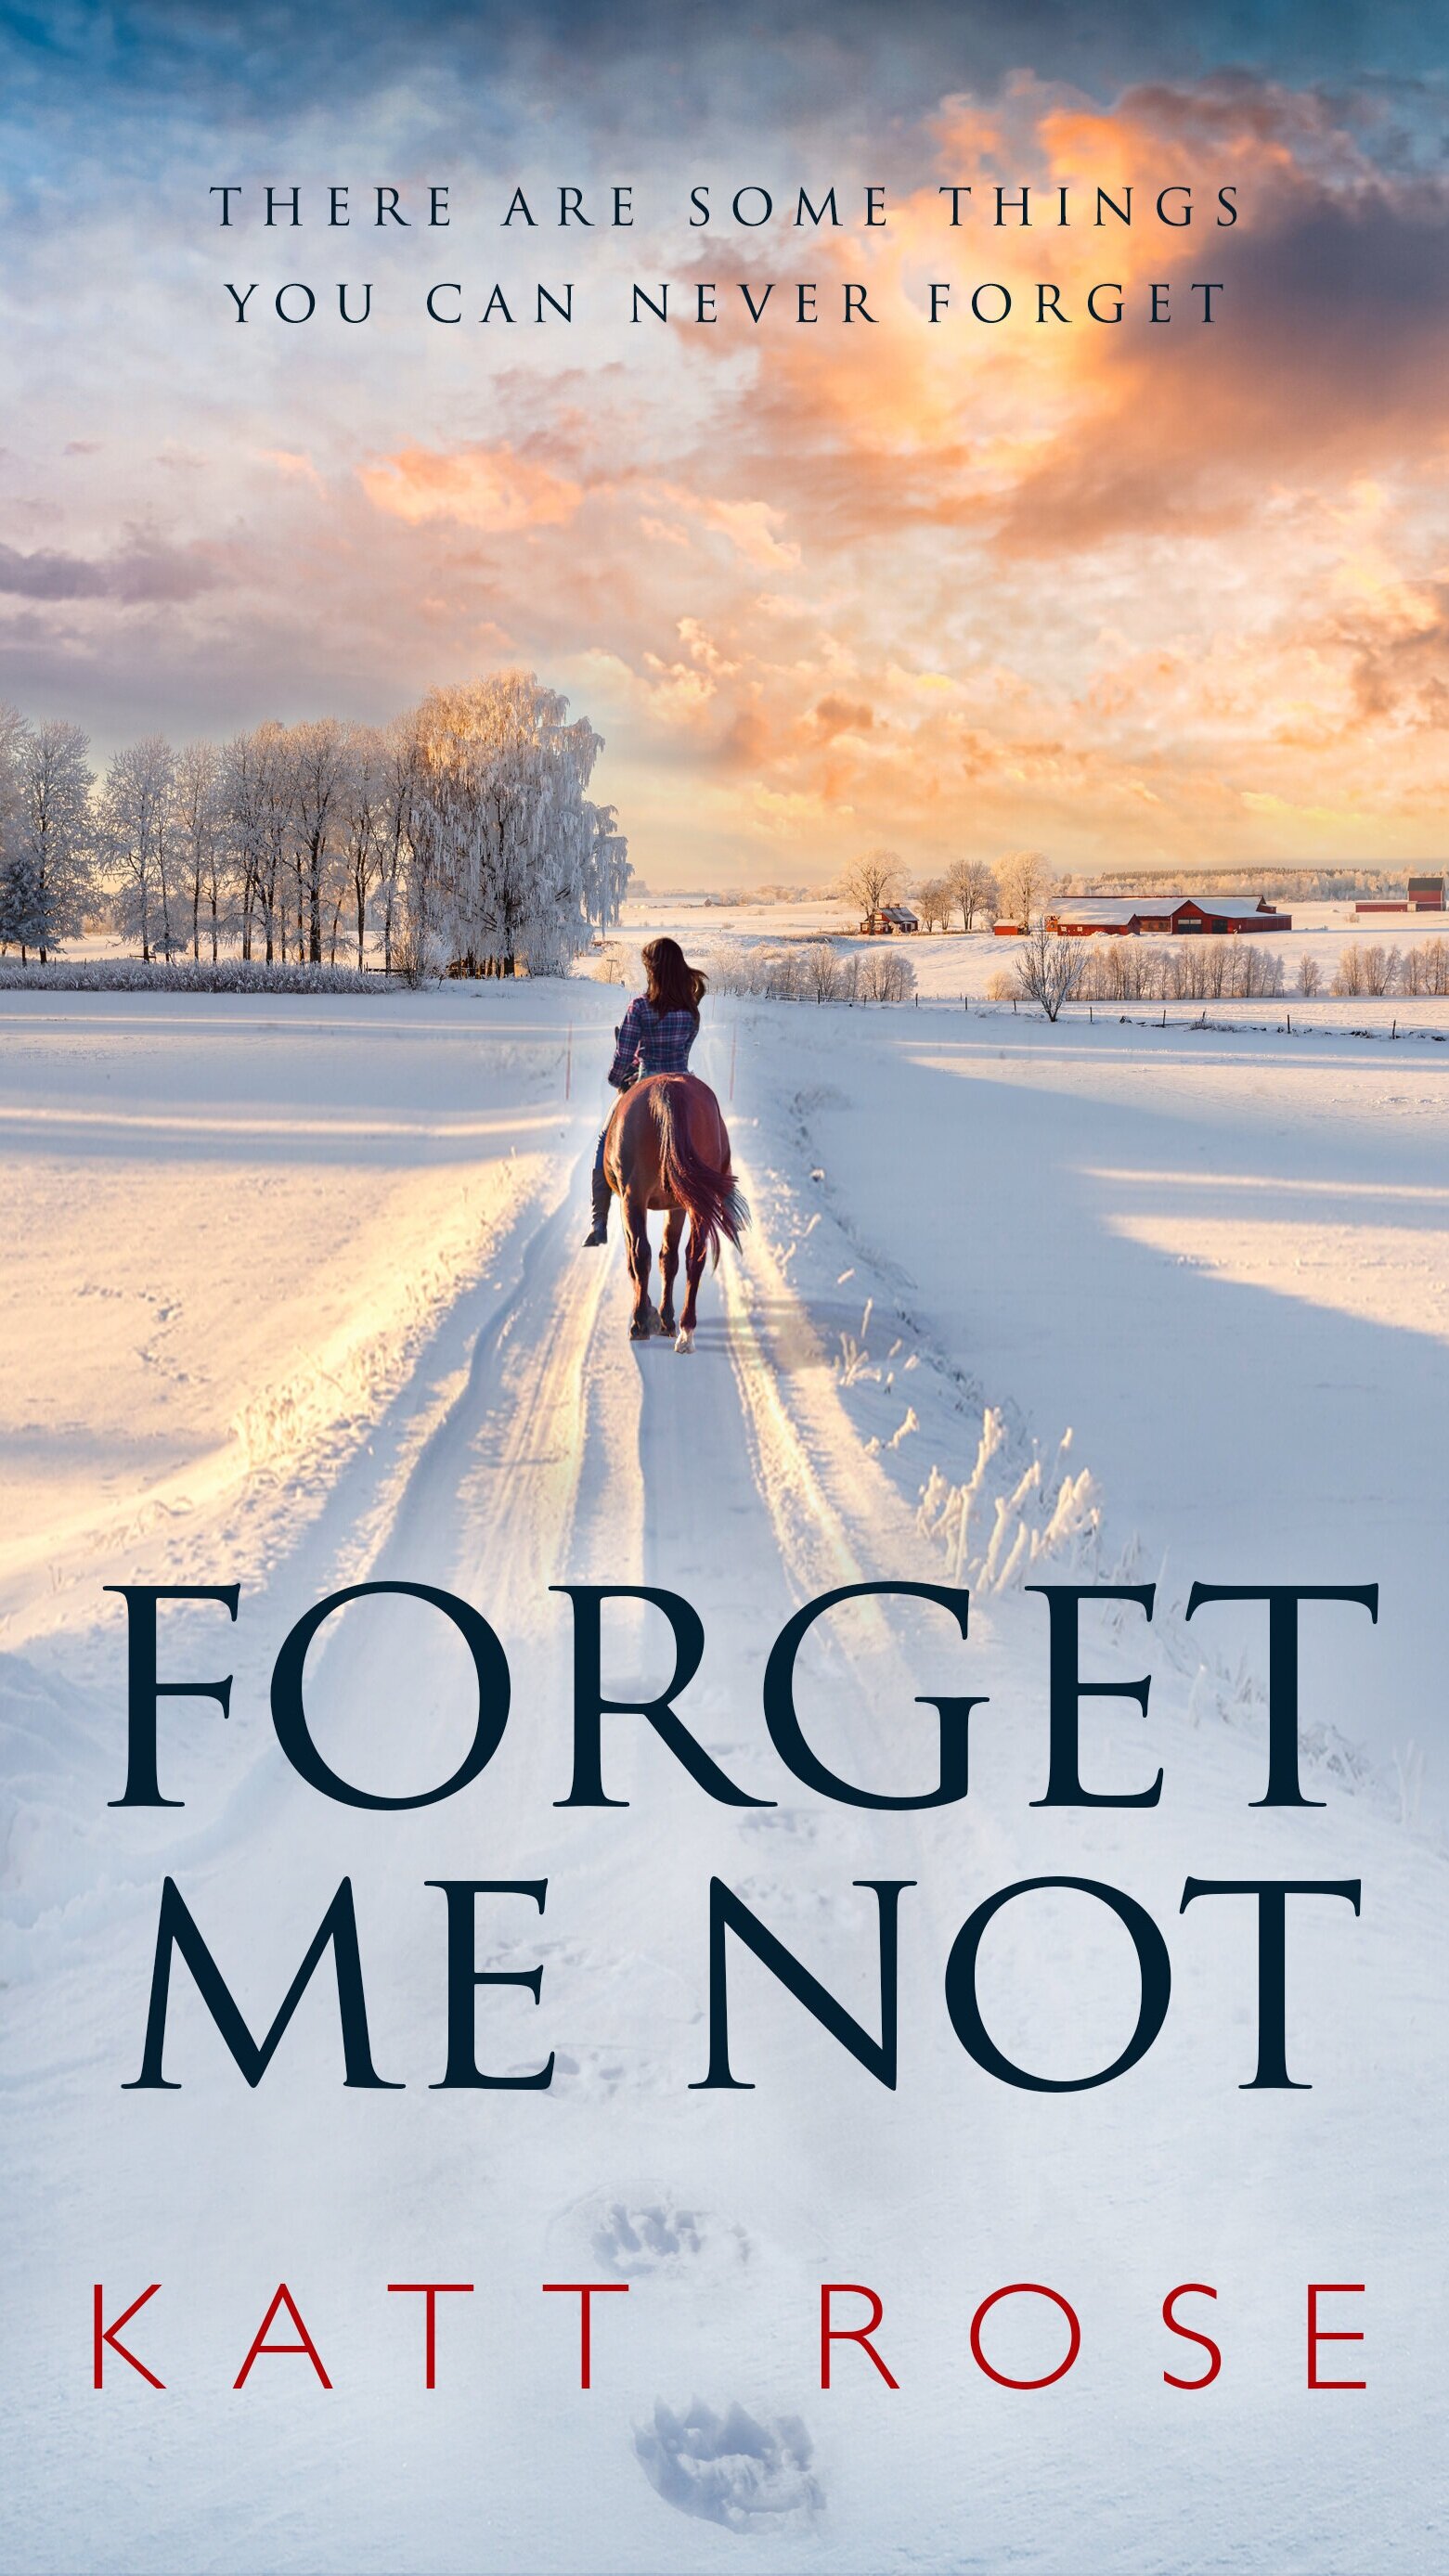 KINDLE+Forget+Me+Not+30+Oct+2019.jpg